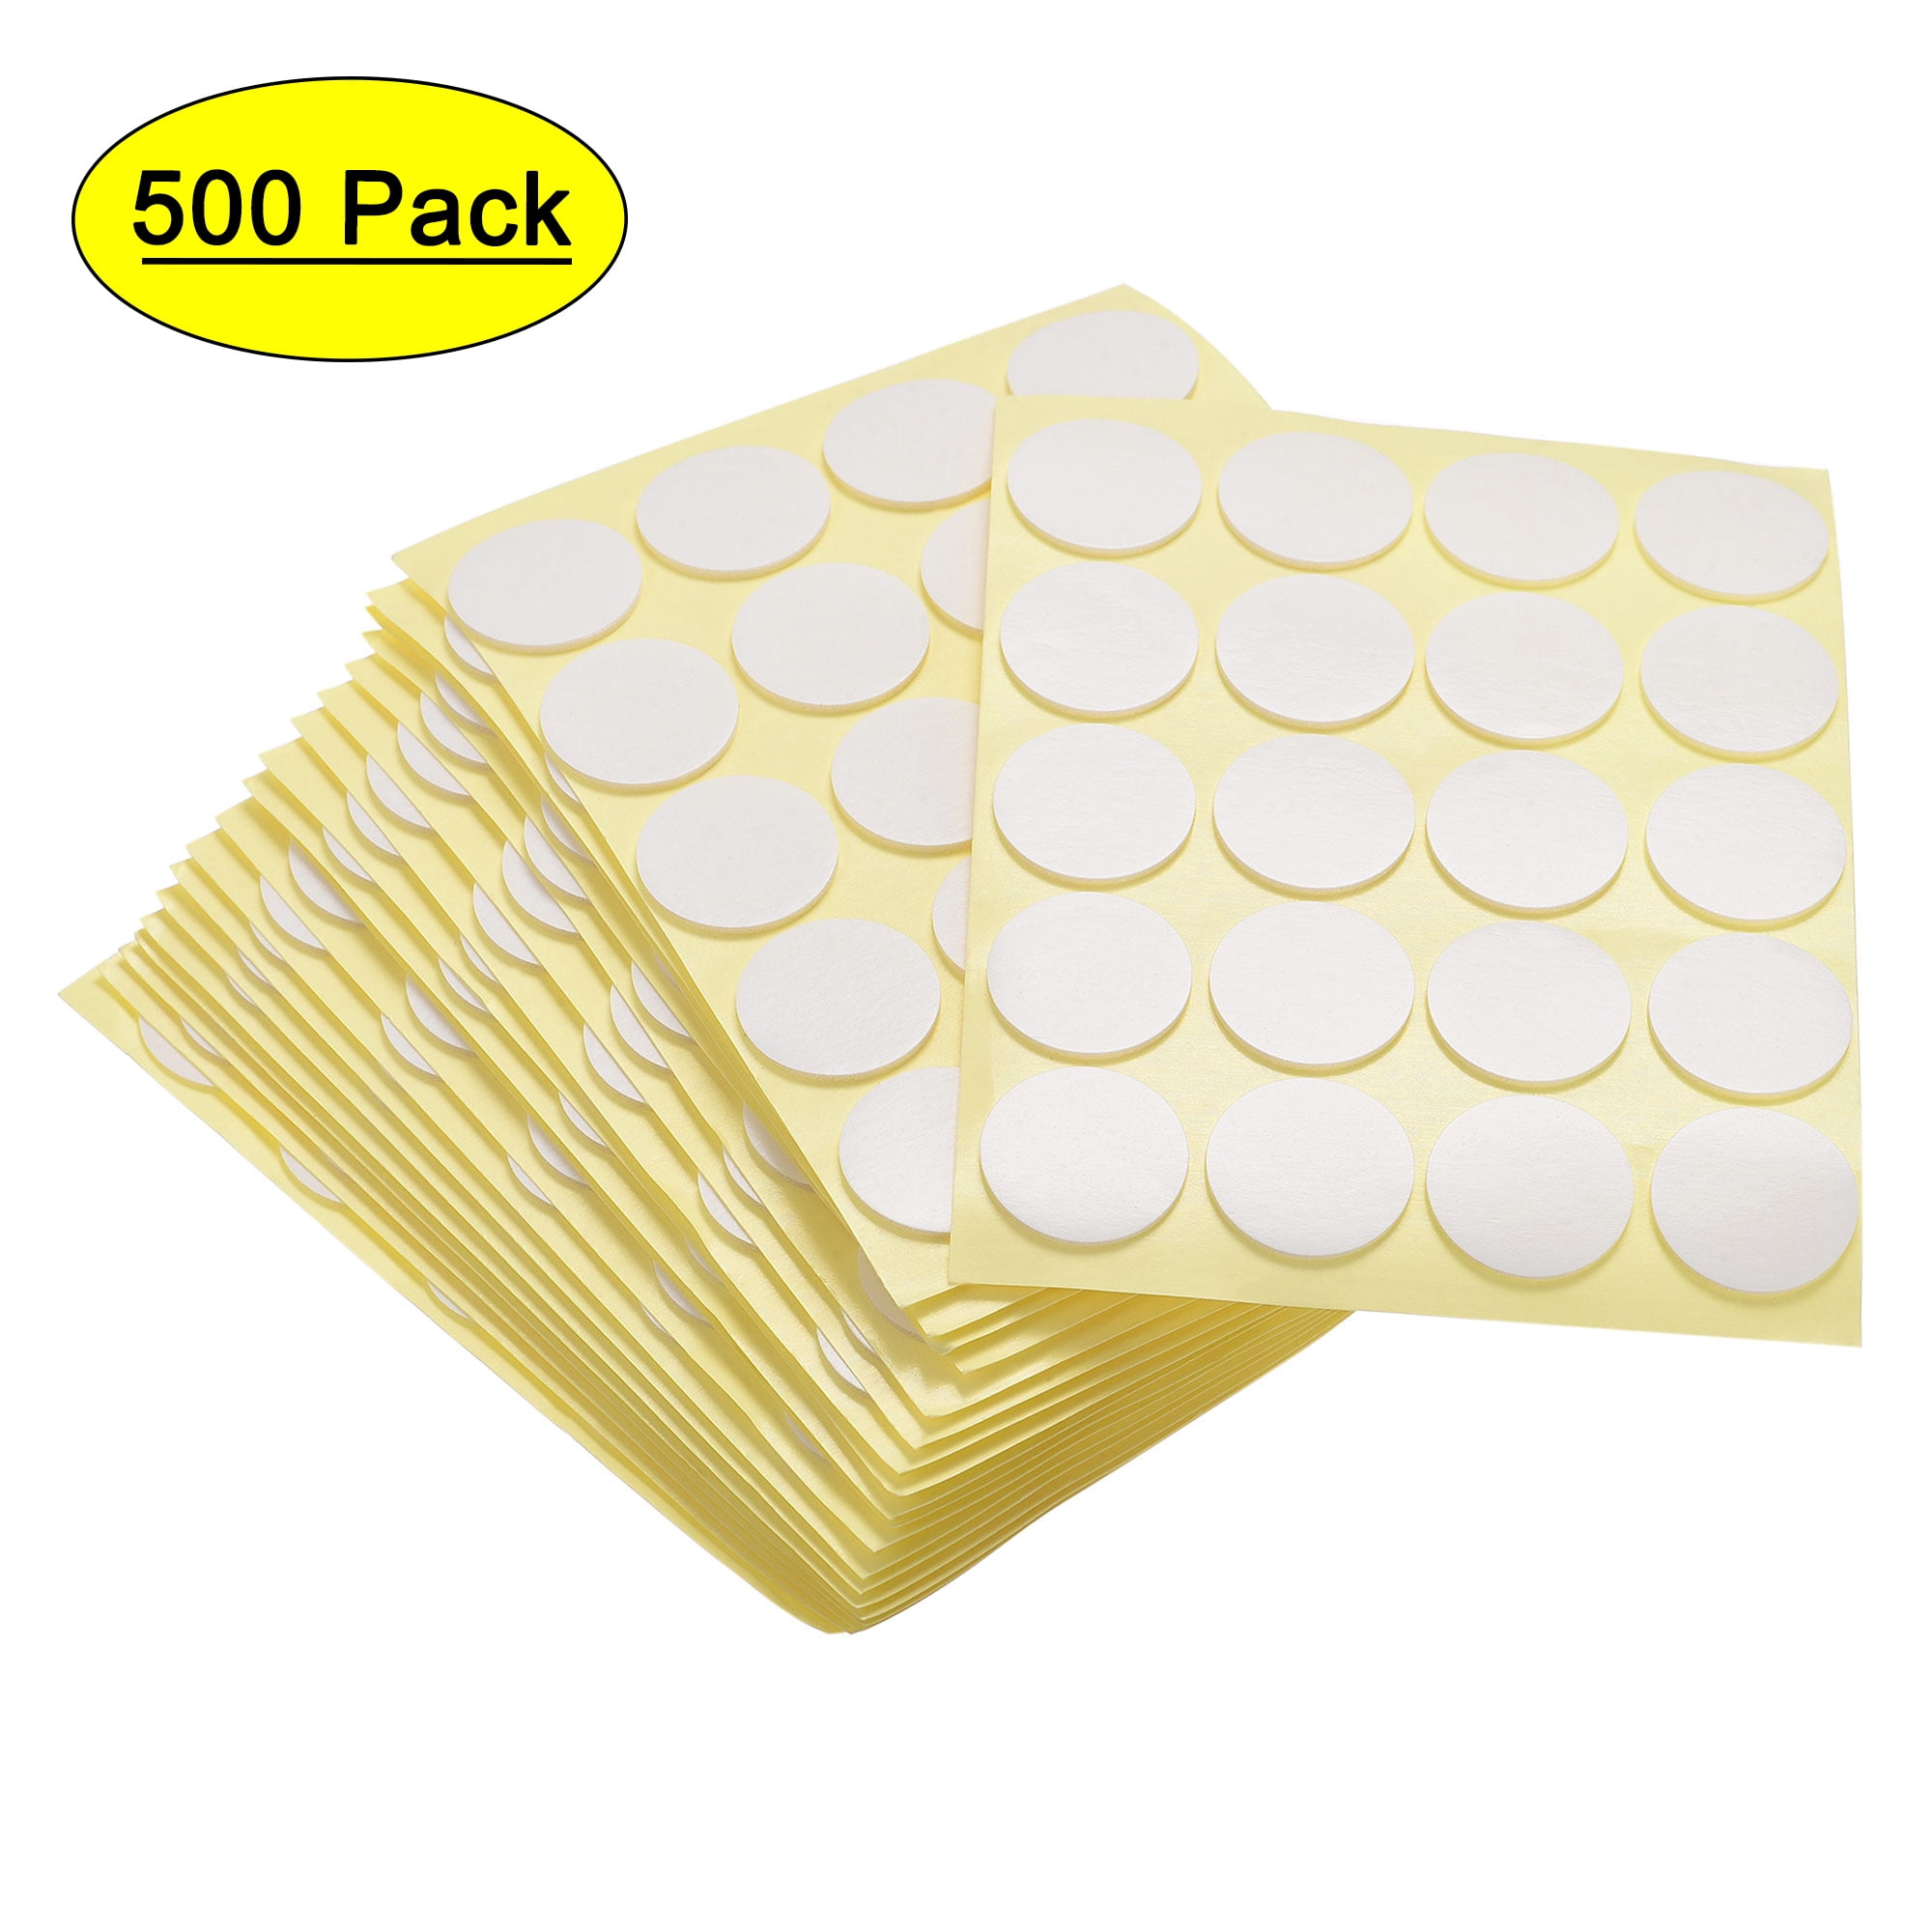 400pcs Candle Wick Stickers Heat Resistance Candle Making Double-Sided Stickers 